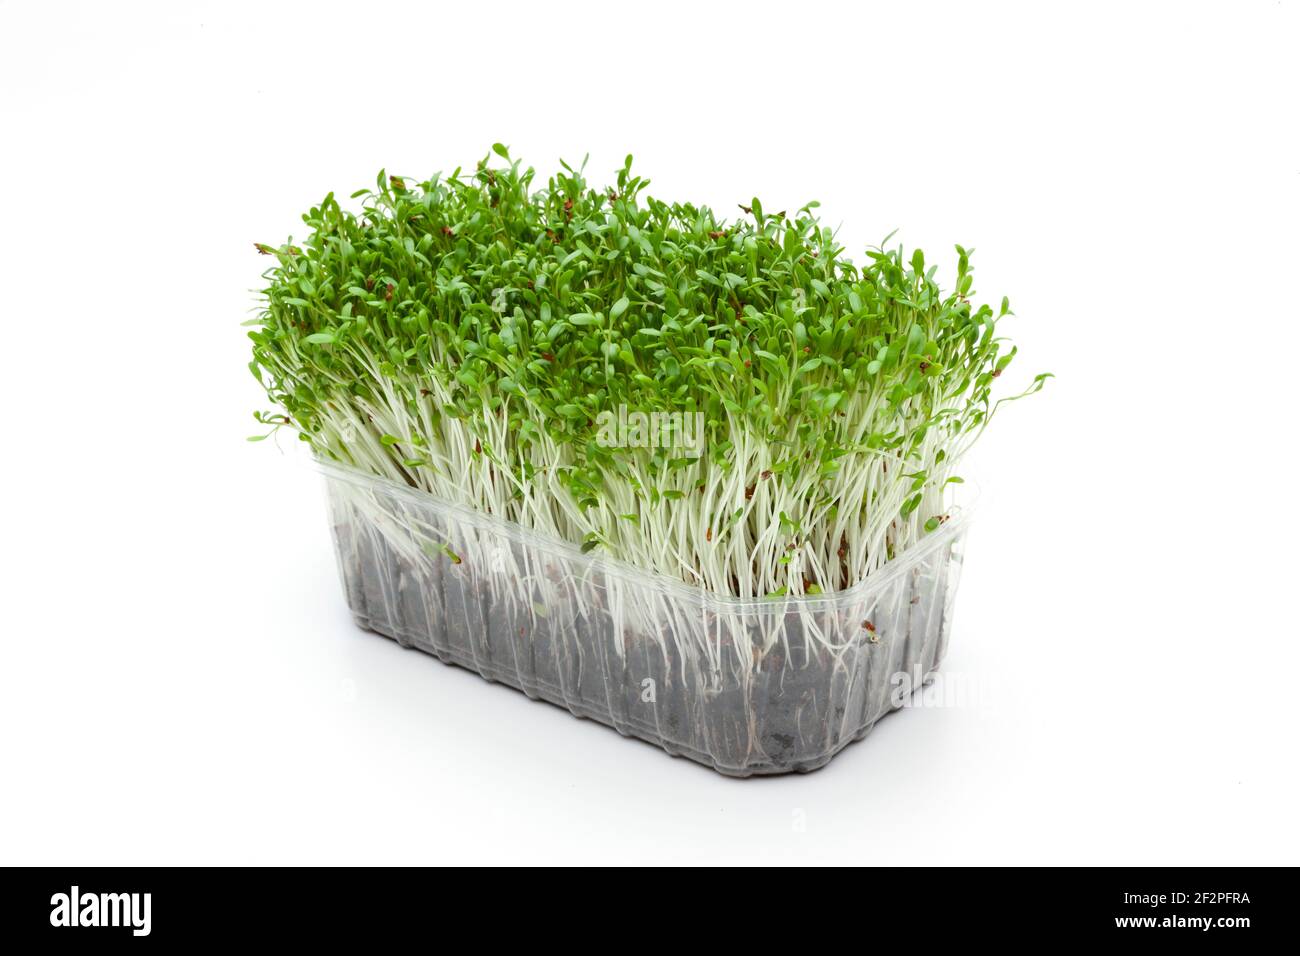 green garden cress isolated against white background Stock Photo